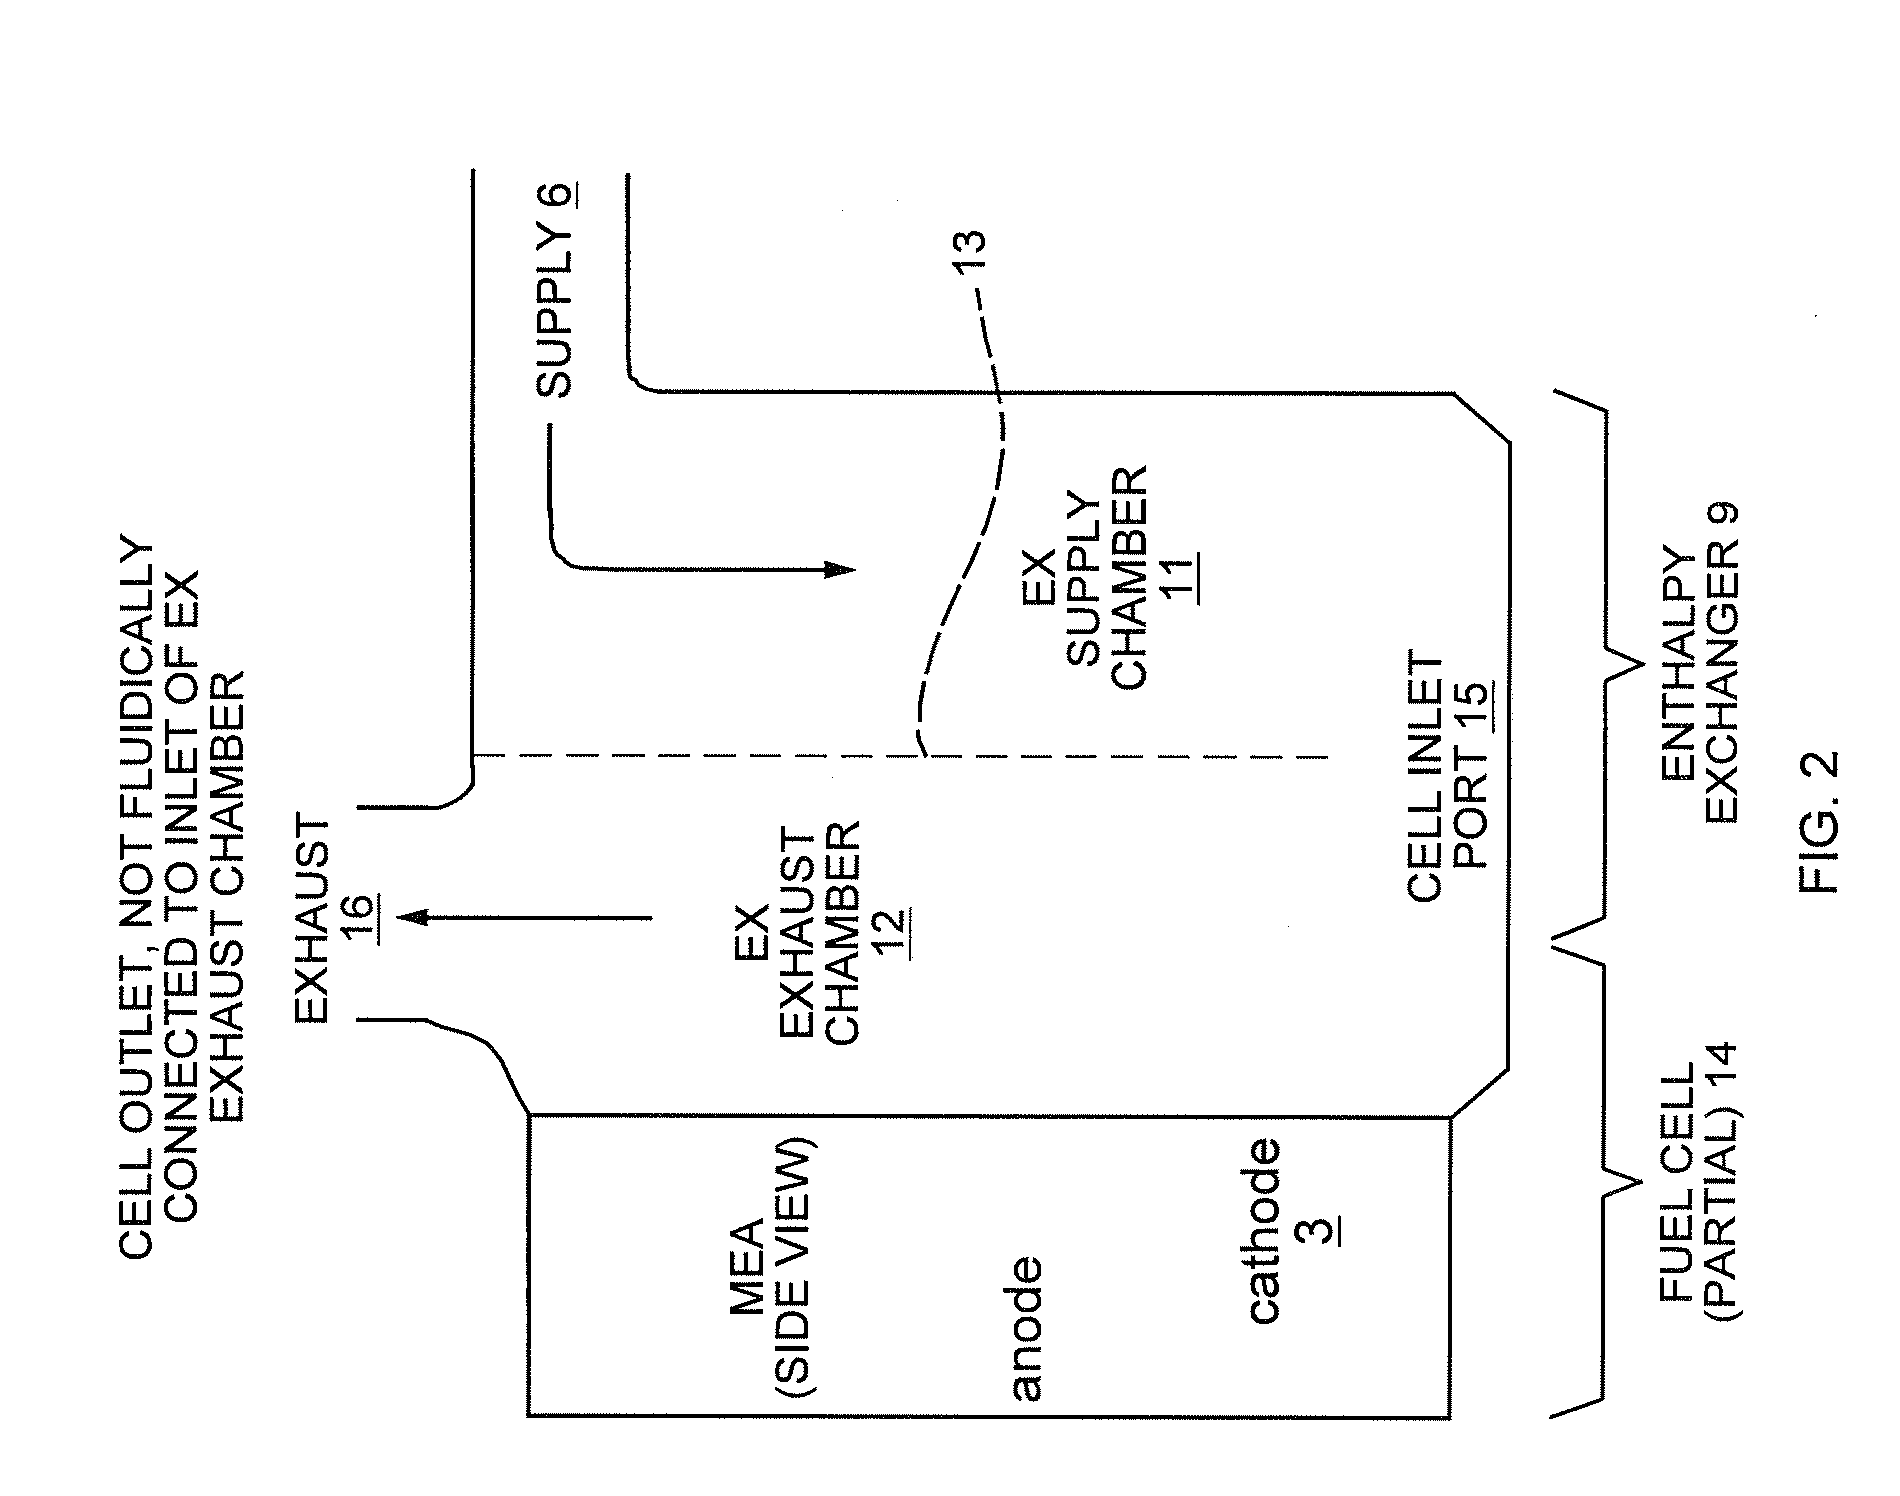 Method and apparatus for internal hydration of a fuel cell system